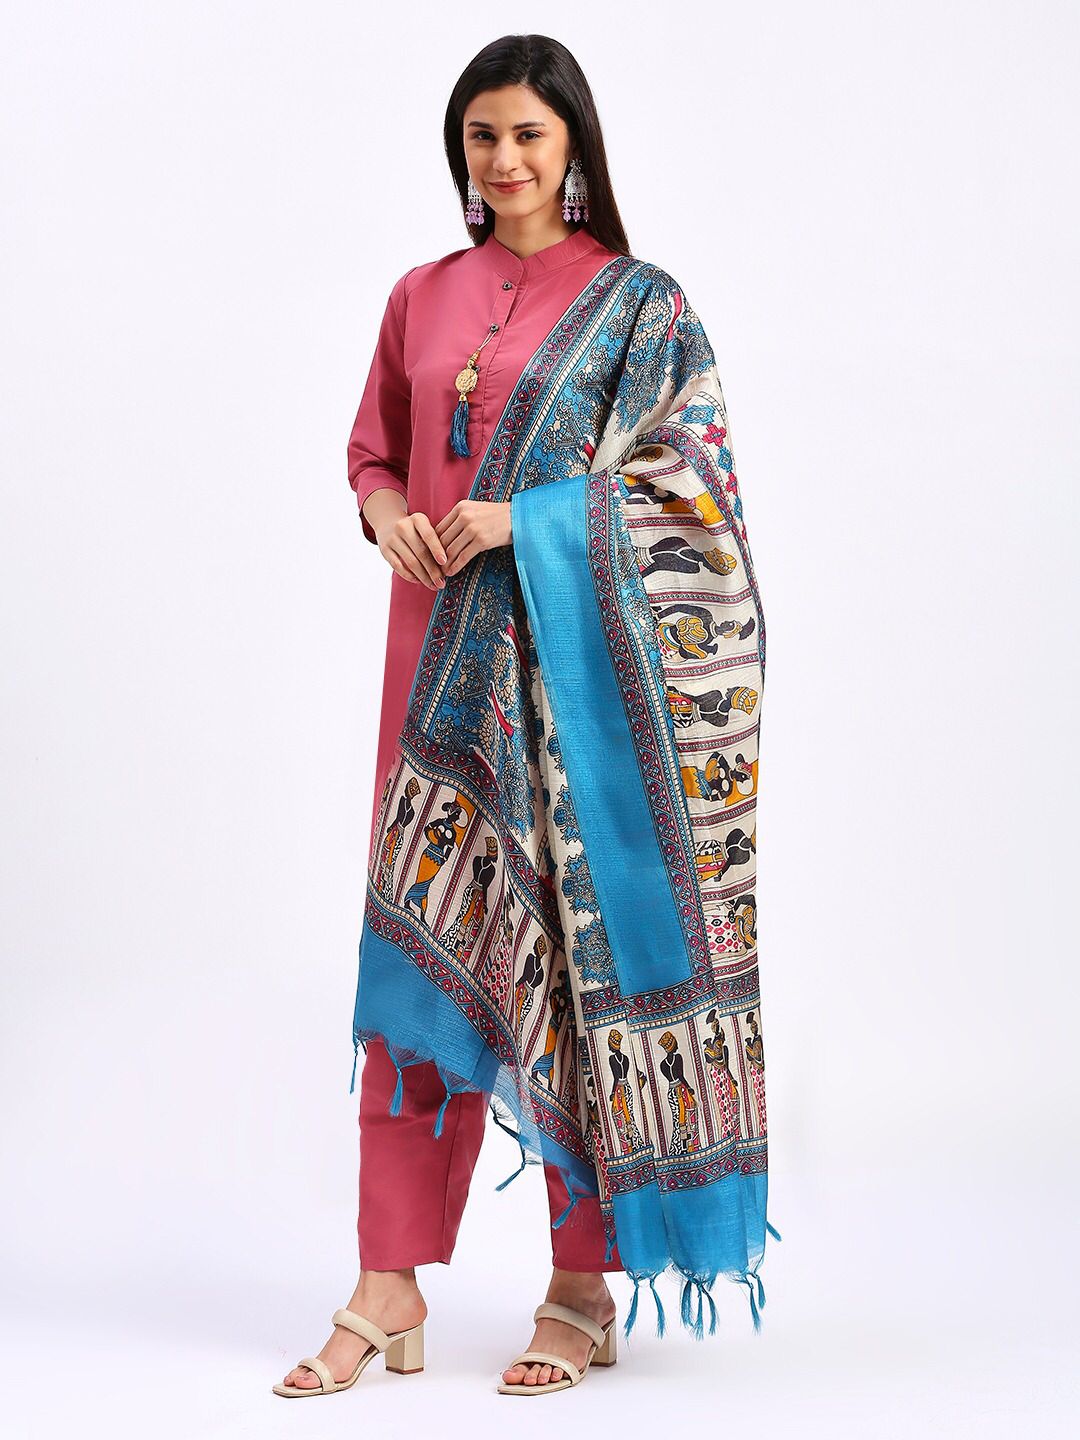 SOLID PINK COLOR ETHNIC WEAR